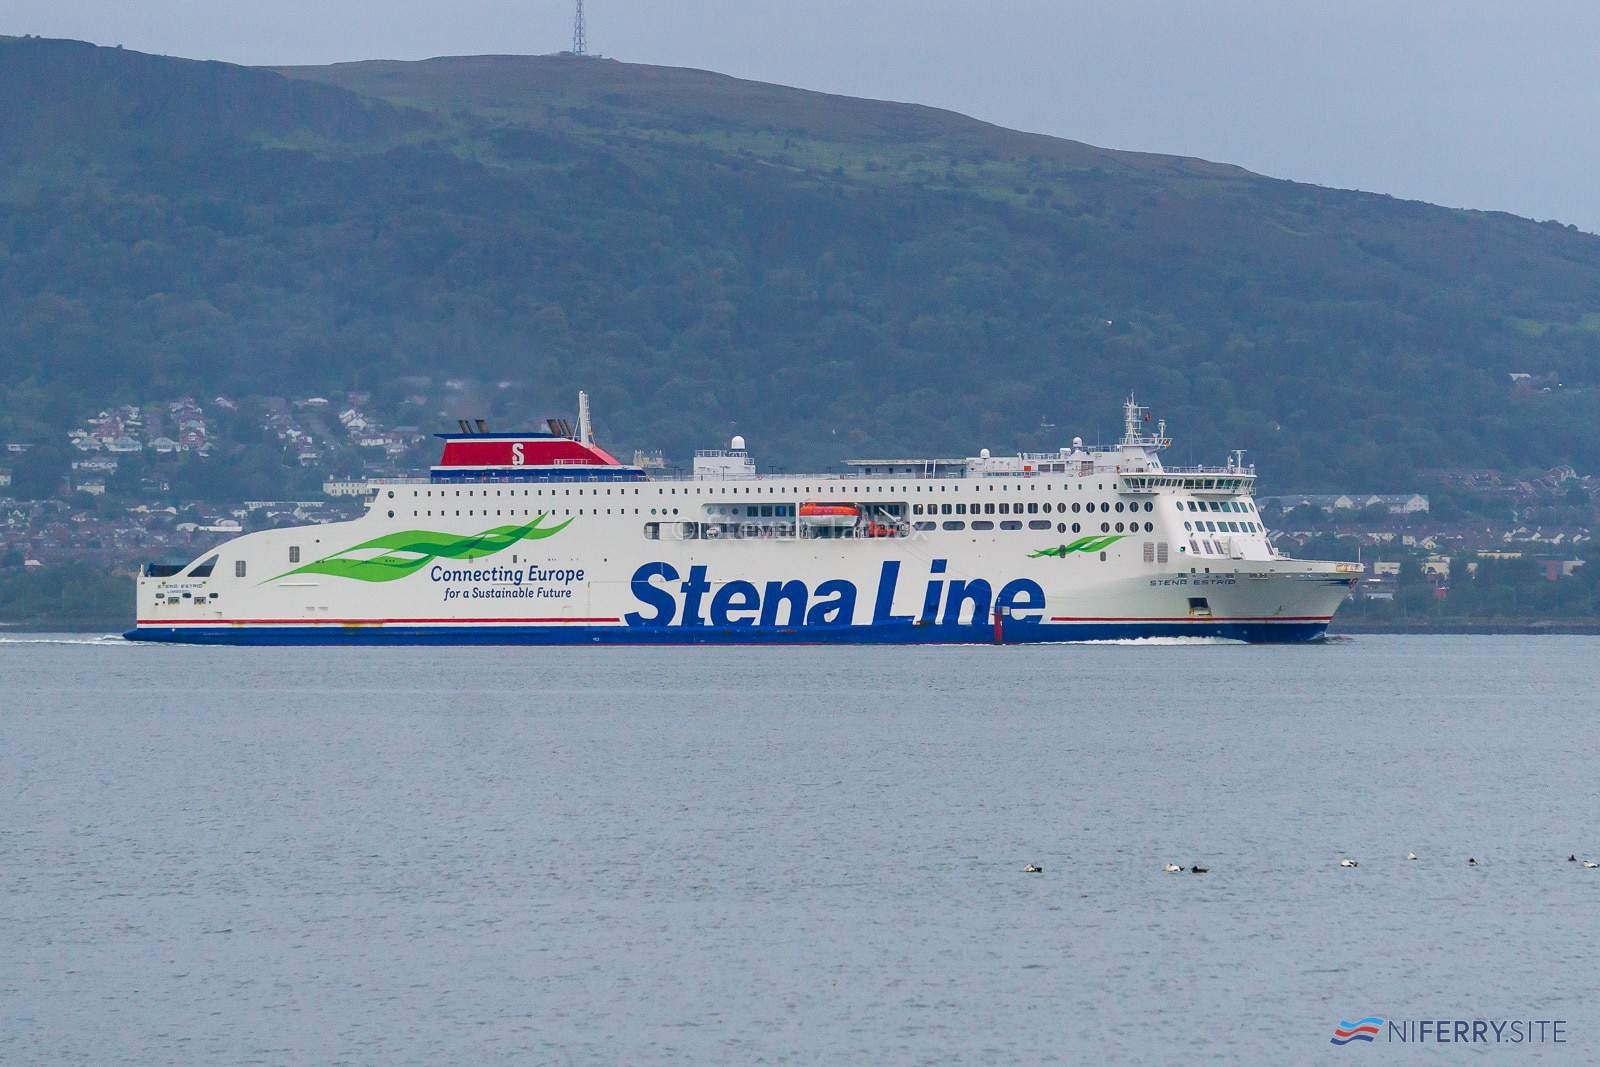 STENA ESTRID departs Belfast for the first time, just after 7am, Thursday, 10.09.20. Copyright © Steven Tarbox